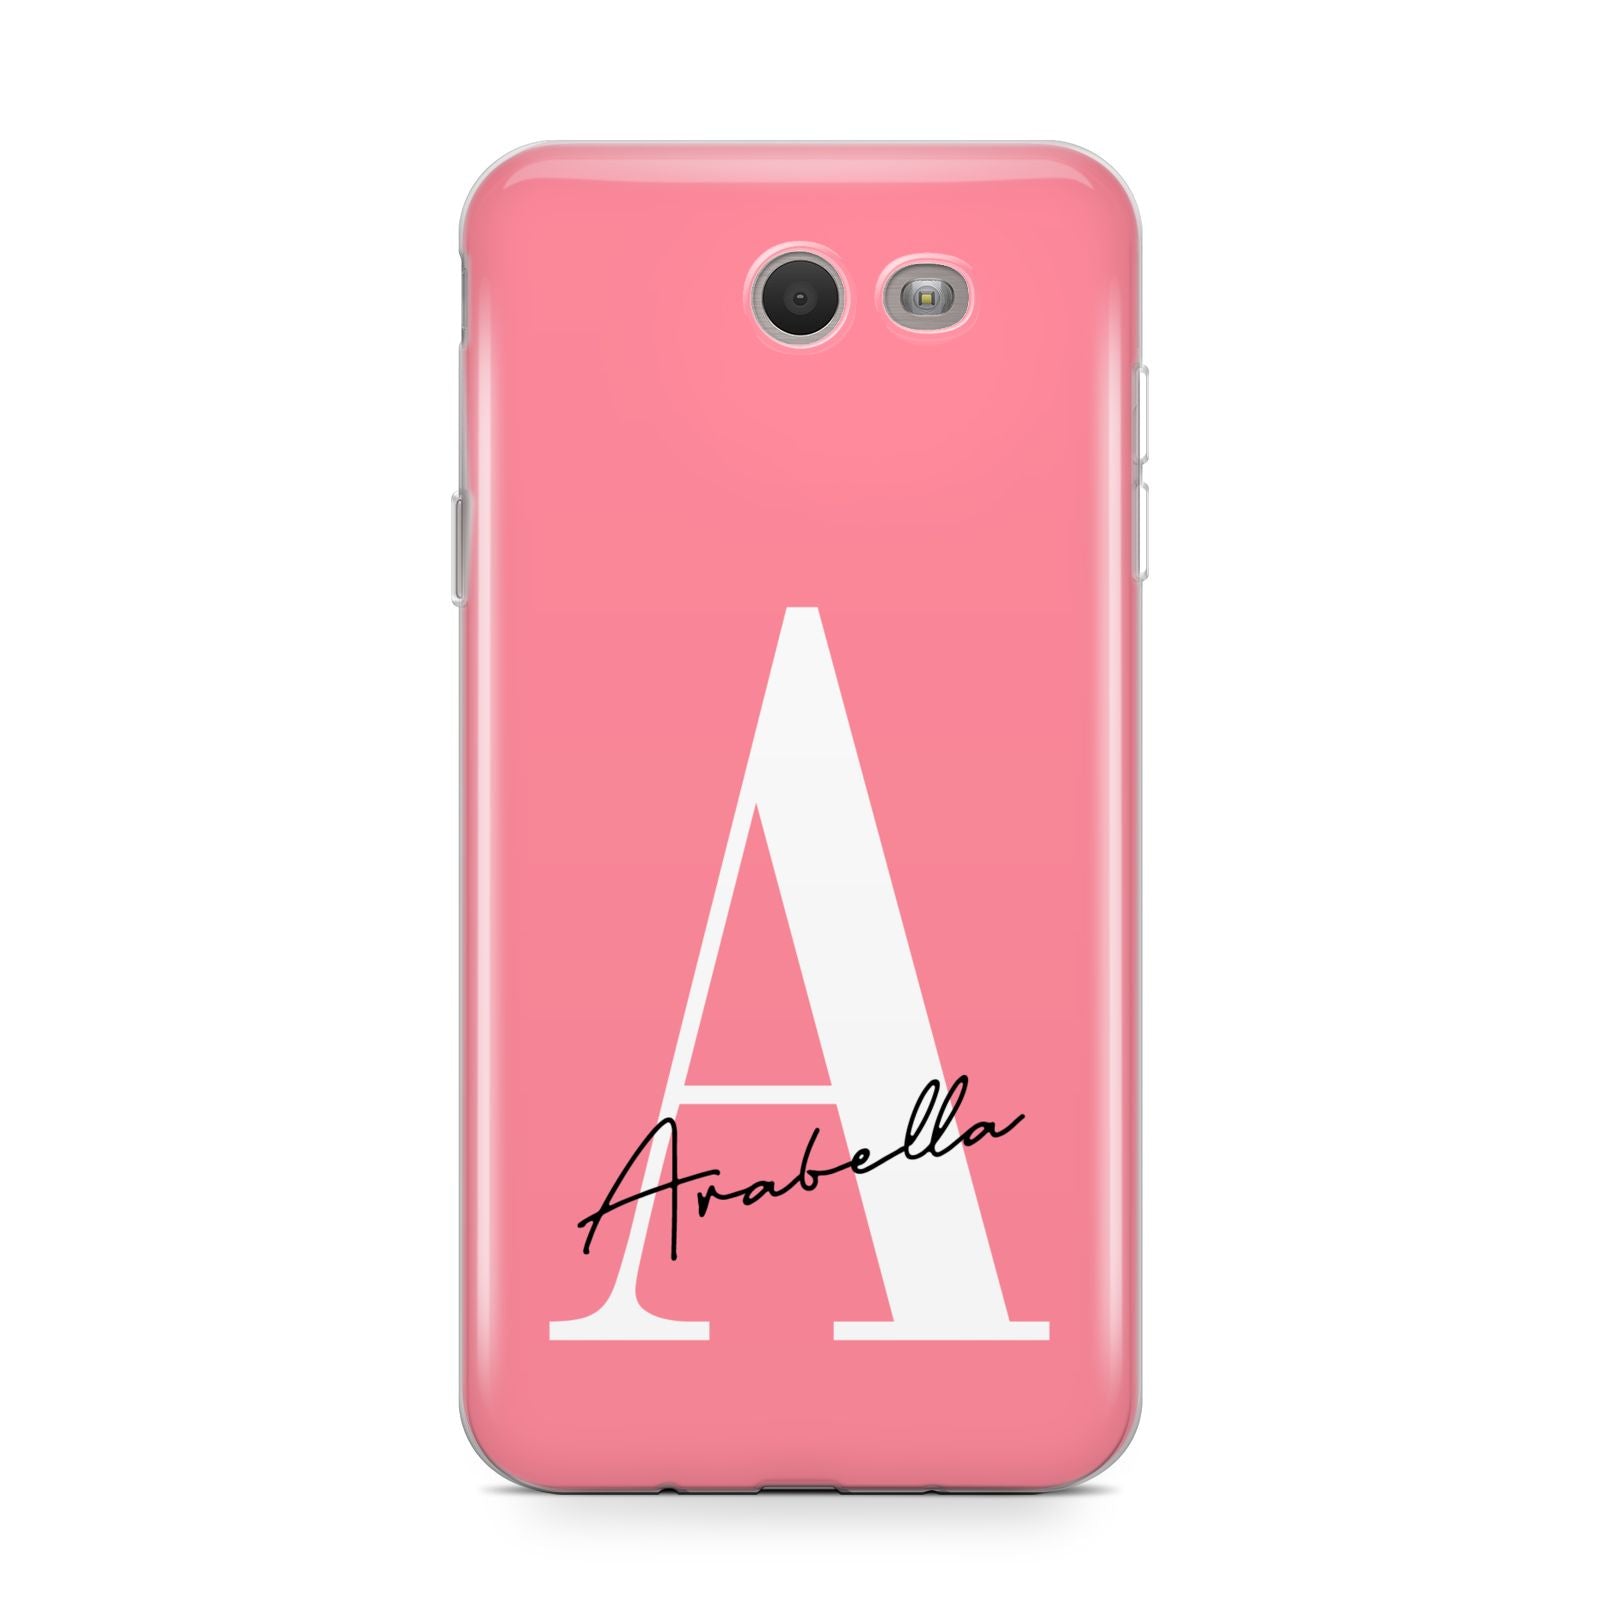 Personalised Pink White Initial Samsung Galaxy J7 2017 Case